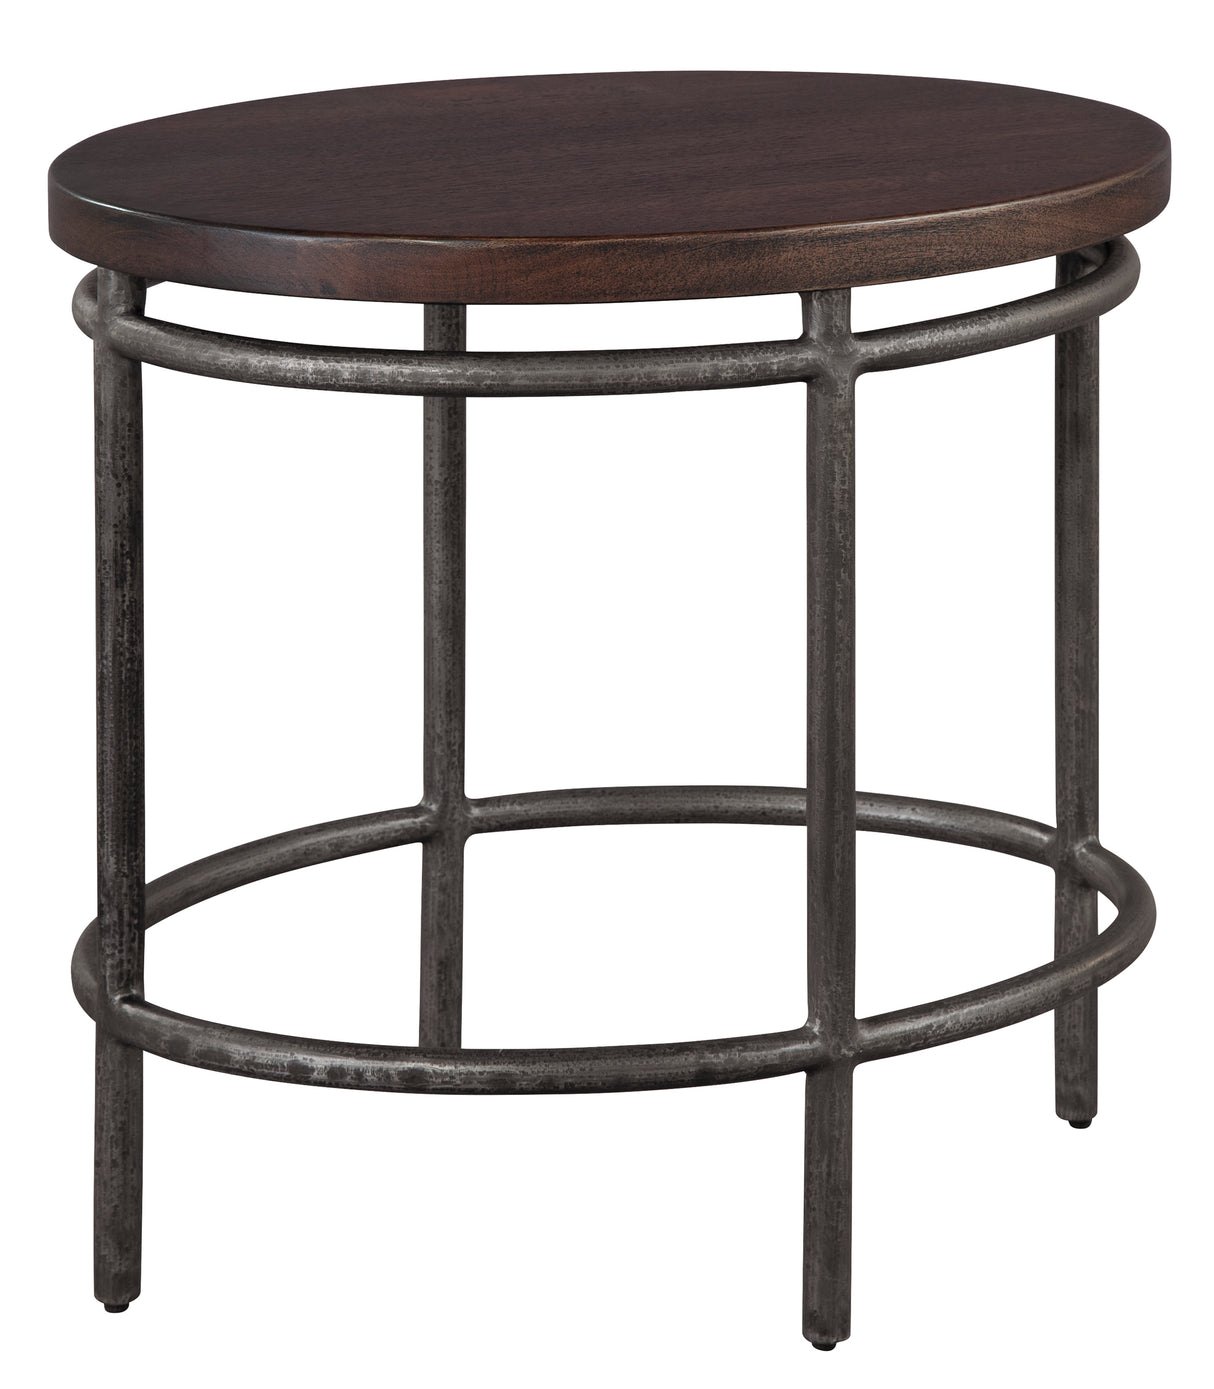 Hekman 24206 Accents 26.25in. x 20.25in. x 25.5in. End Table